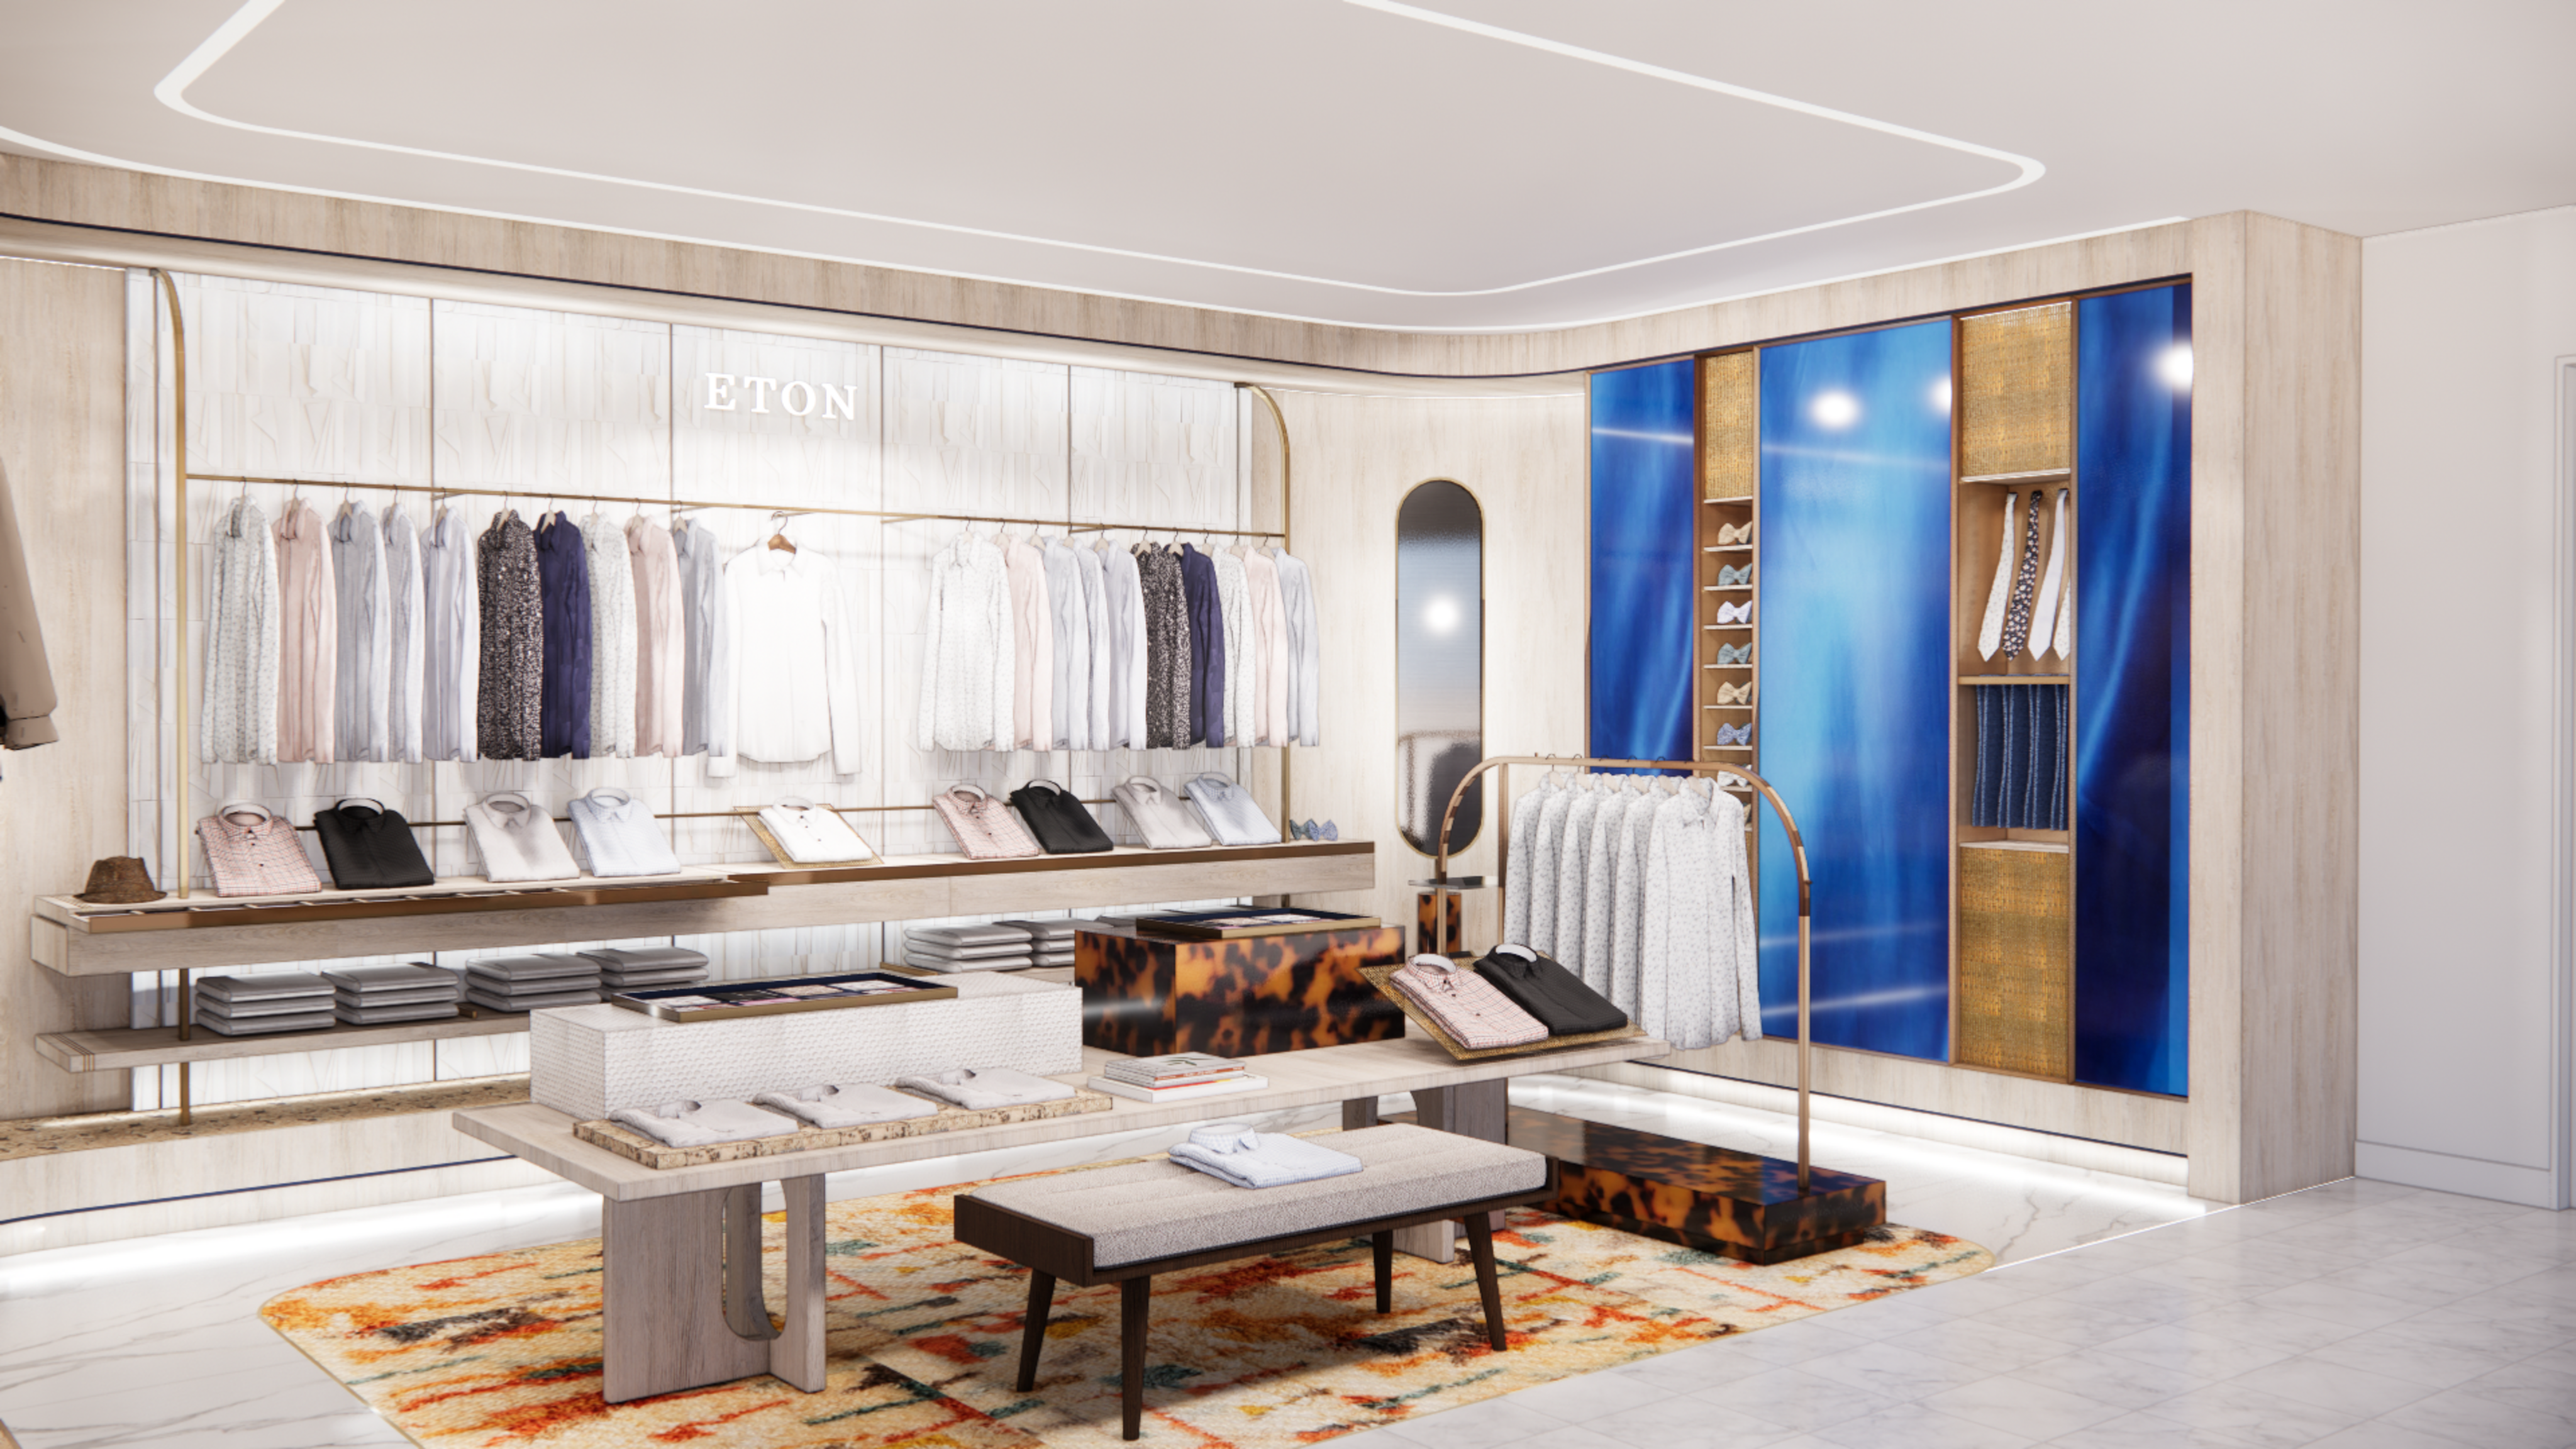 Eton opens new stores – and updates existing ones